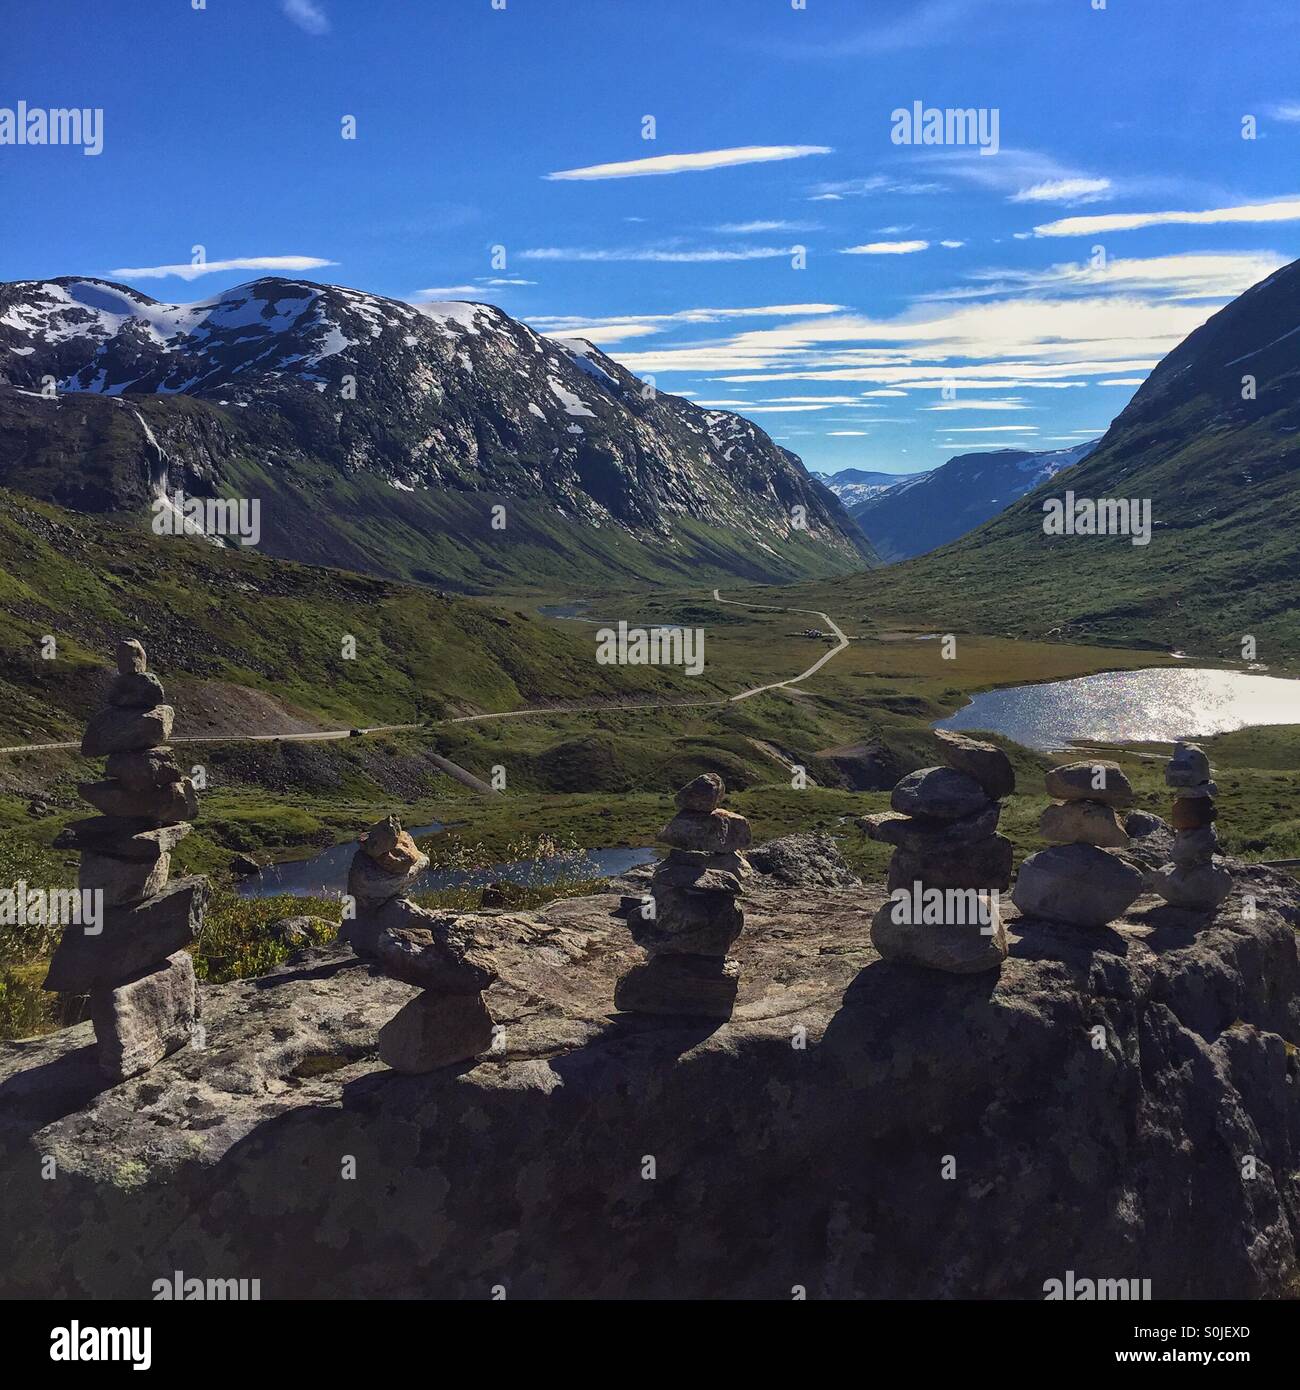 Stone cairns, Norddal, Norway Stock Photo